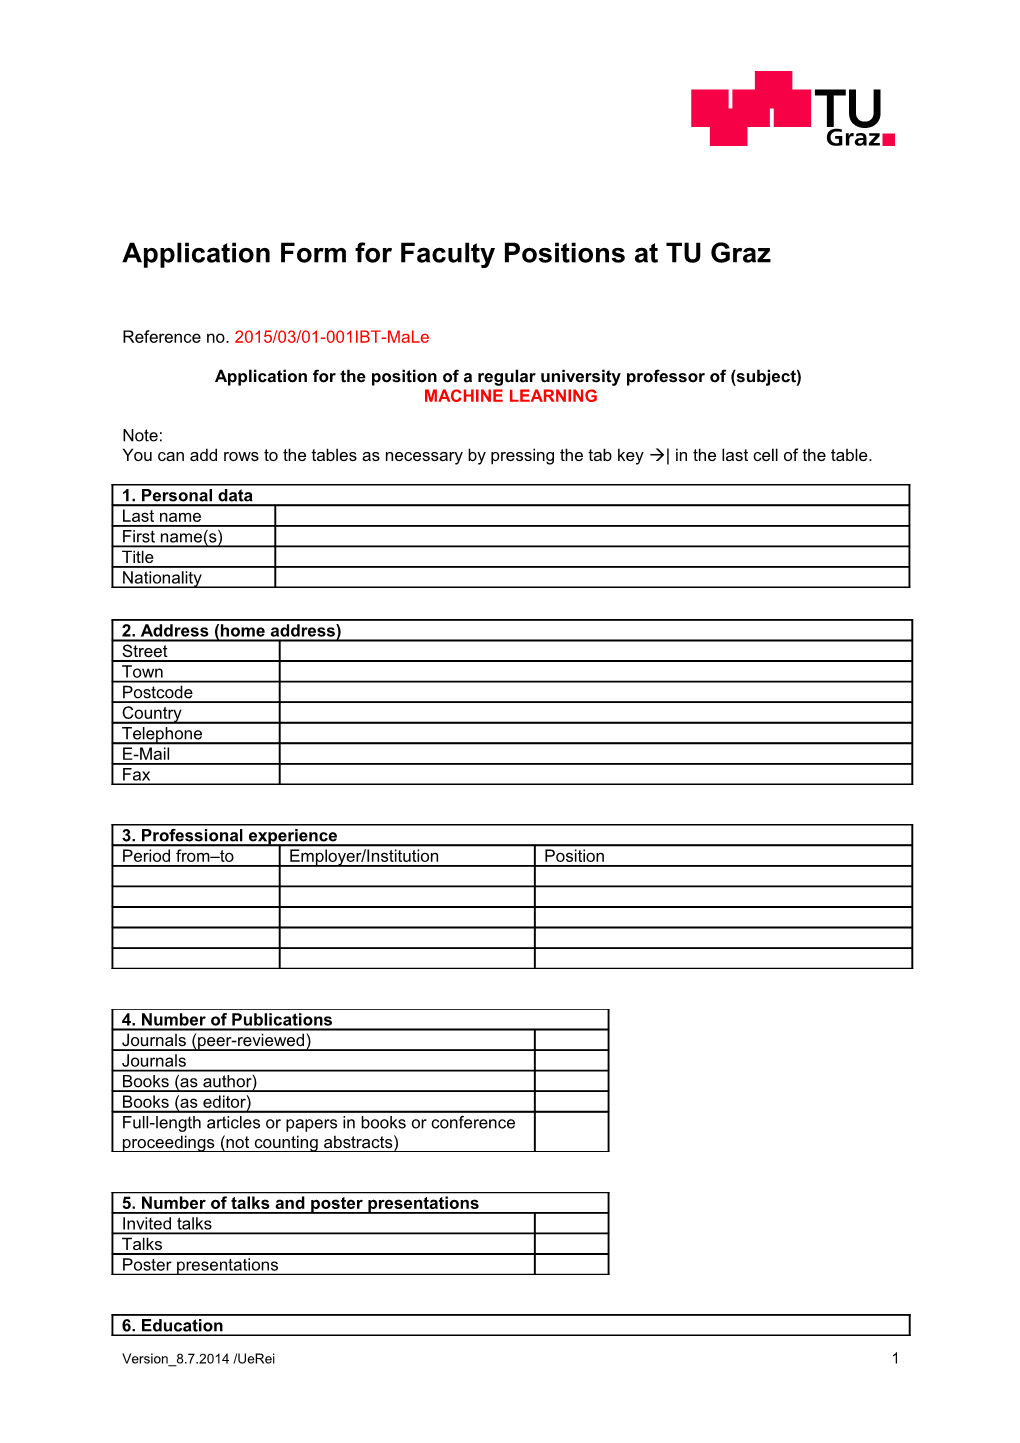 Application Form for Faculty Positions at TU Graz